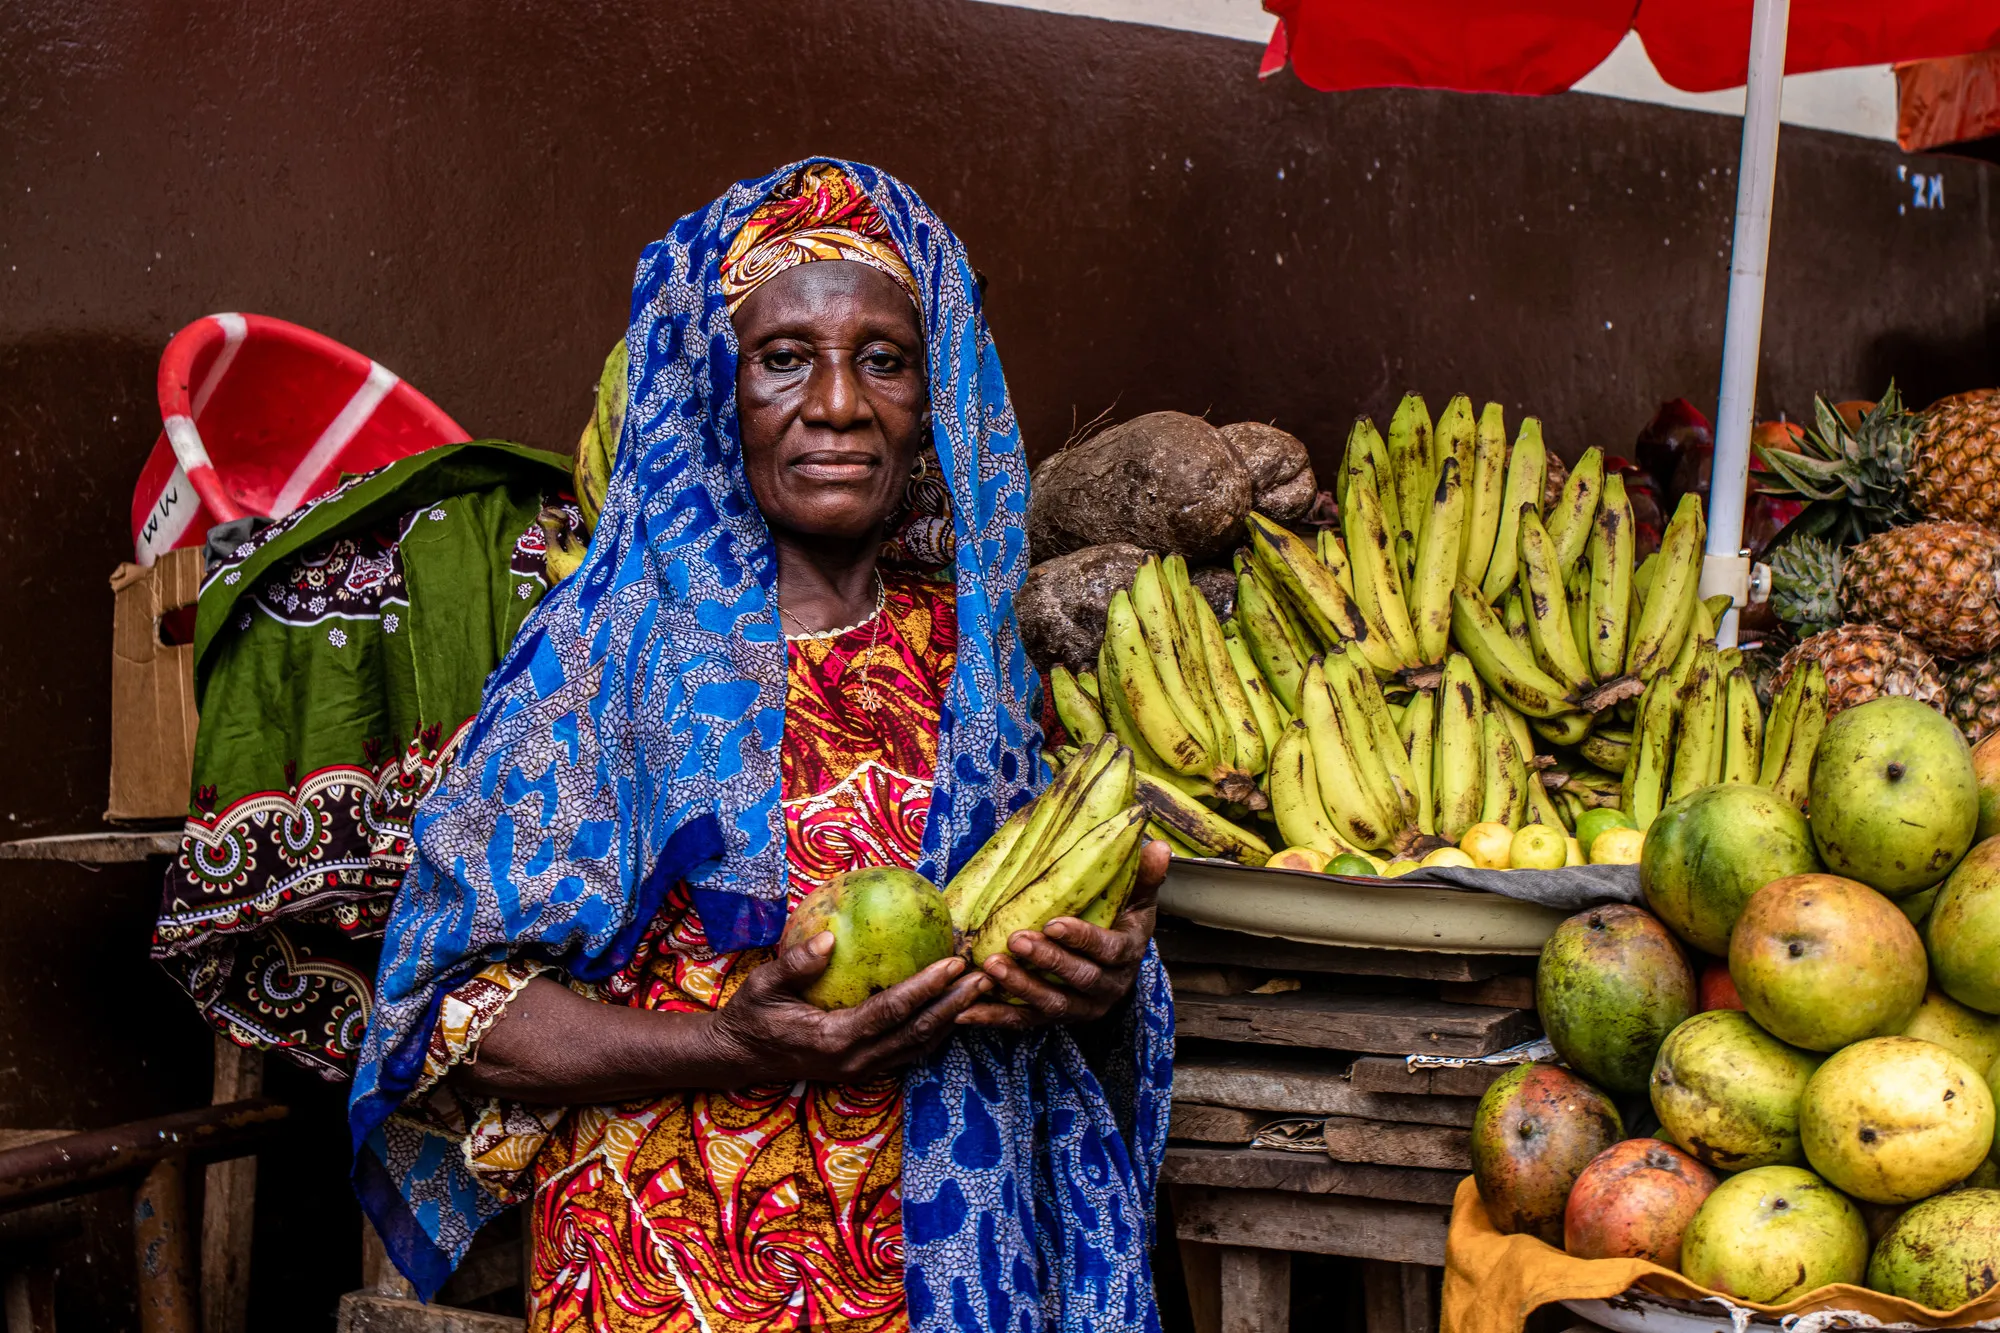 A woman at a fruit stand holds bananas and other fruits.